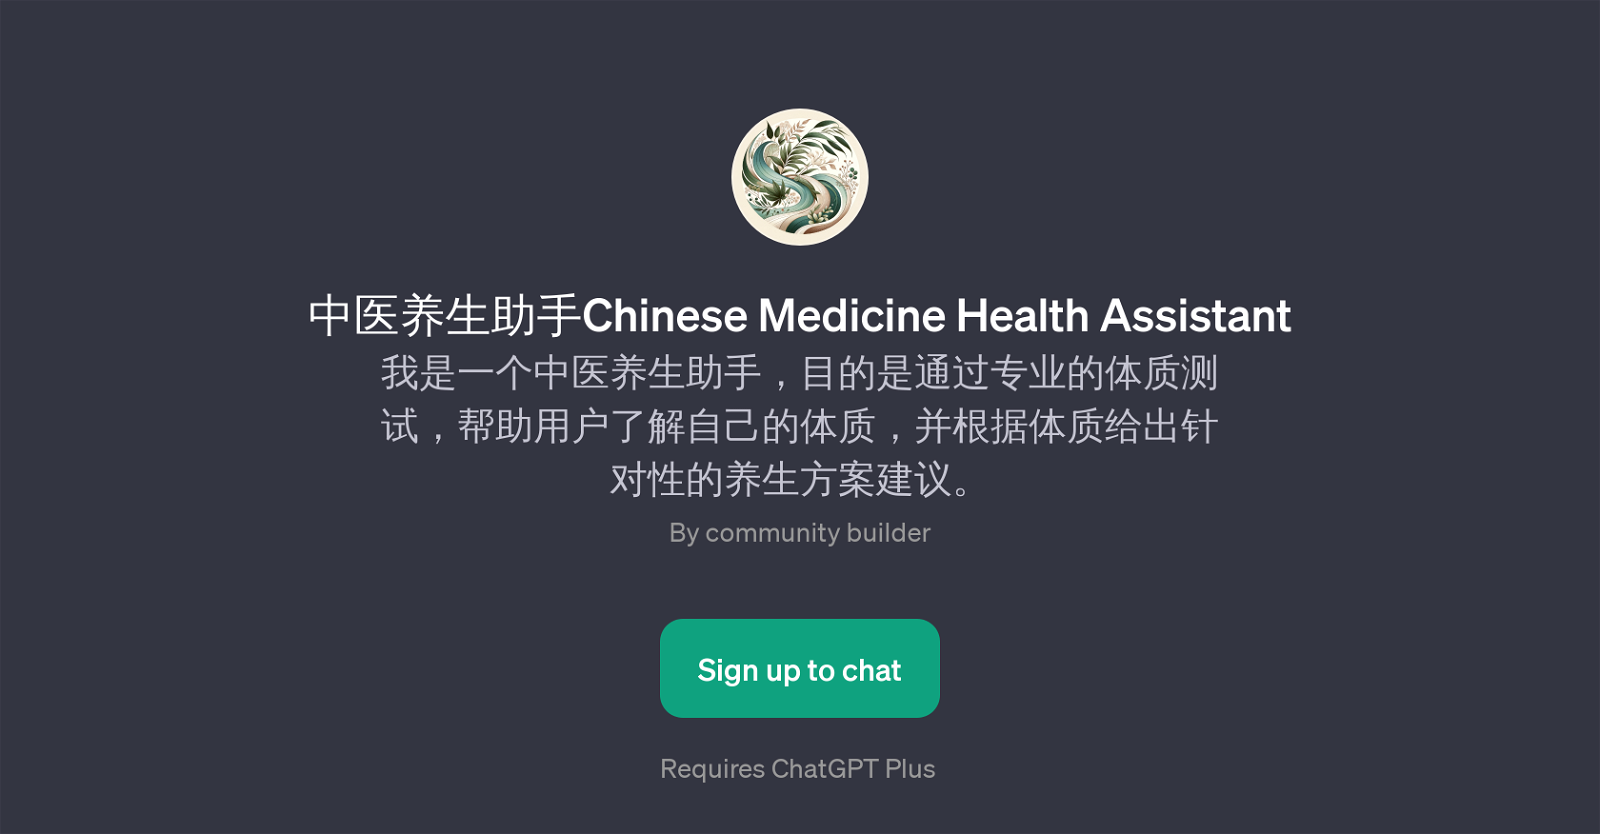 Chinese Medicine Health Assistant website